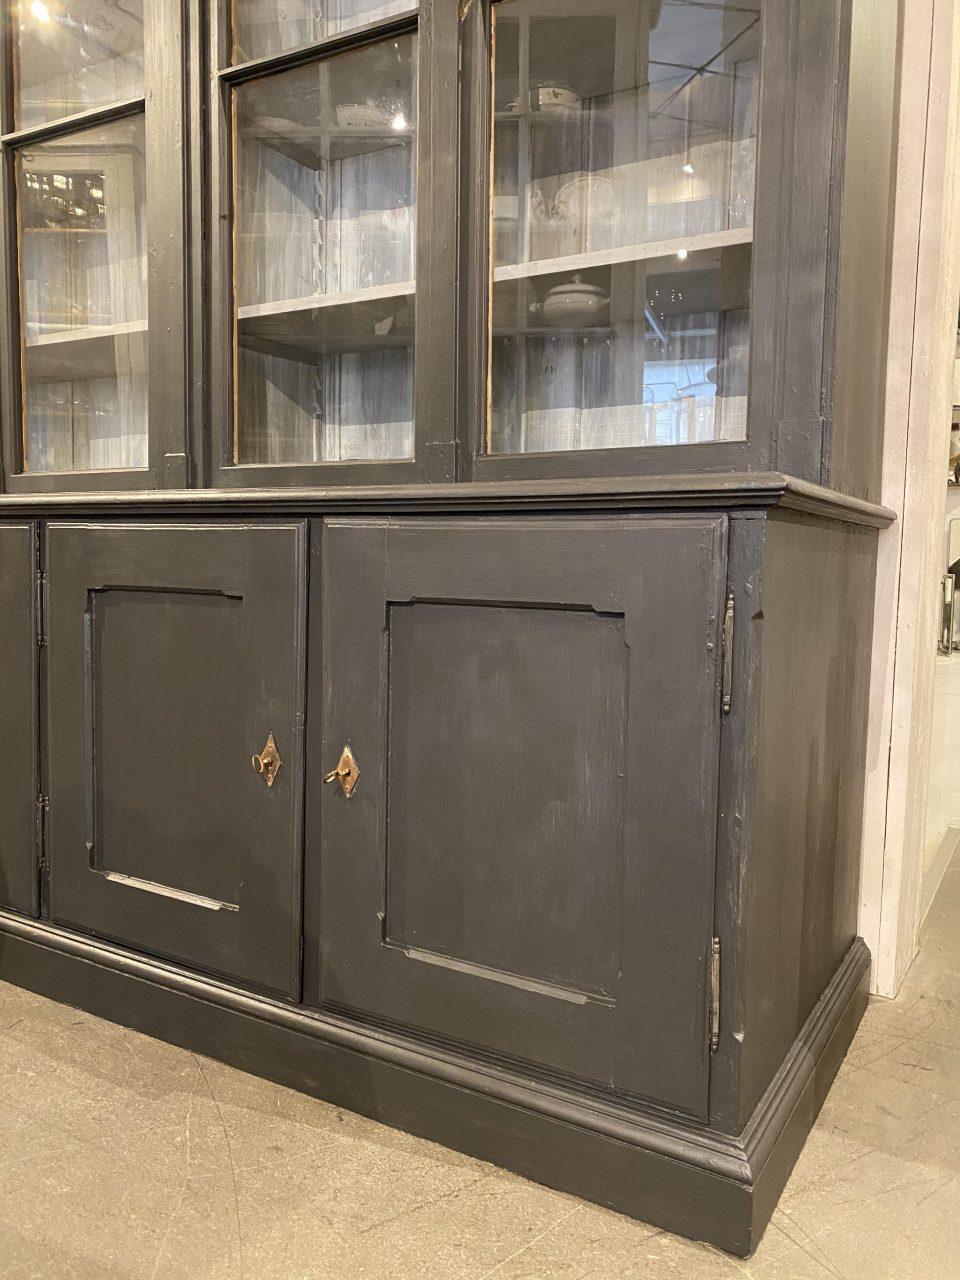 Enormous, handsome and seldom found antique 2 part cabinet / bookcase, from France. 4 beautifully profiled vitrine doors (original glass). The shelves behind are height adjustable. The lower part on the right has practial drawers, and the right side